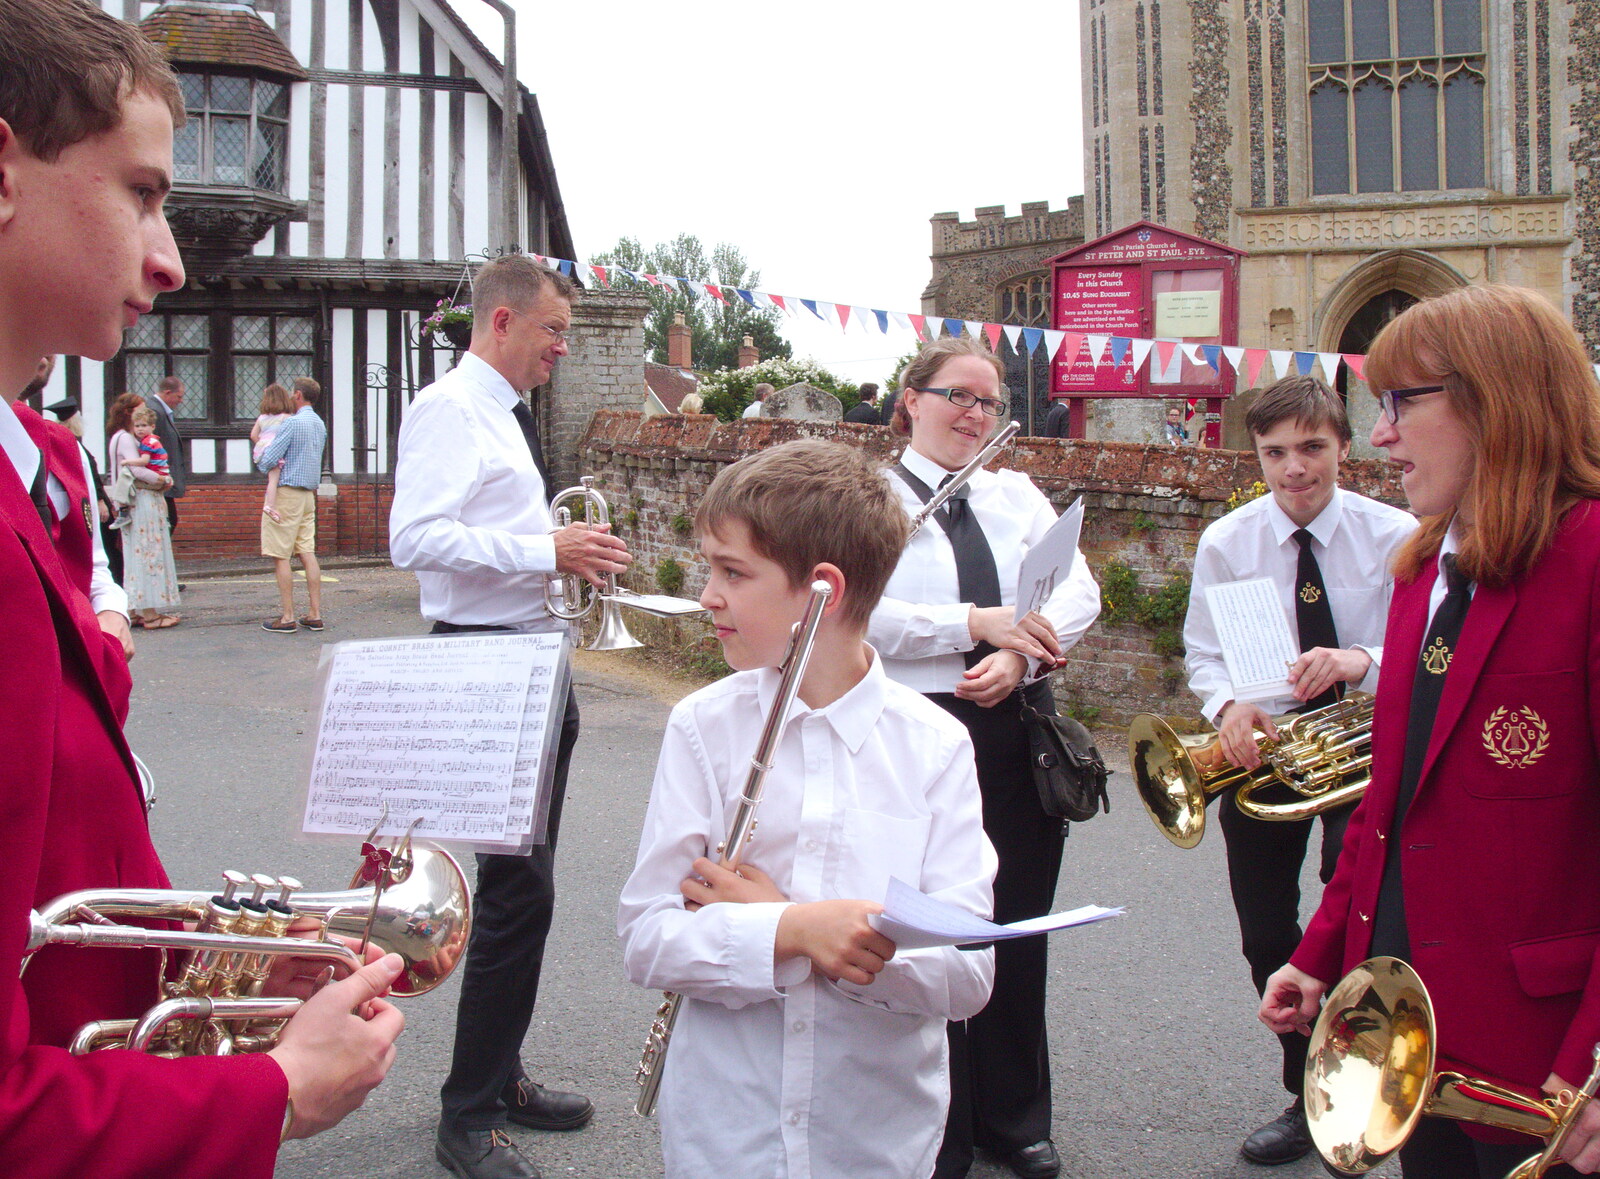 Fred hangs around with the band from The BSCC at North Lopham, and the GSB Mayor's Parade, Eye, Suffolk - 23rd June 2019